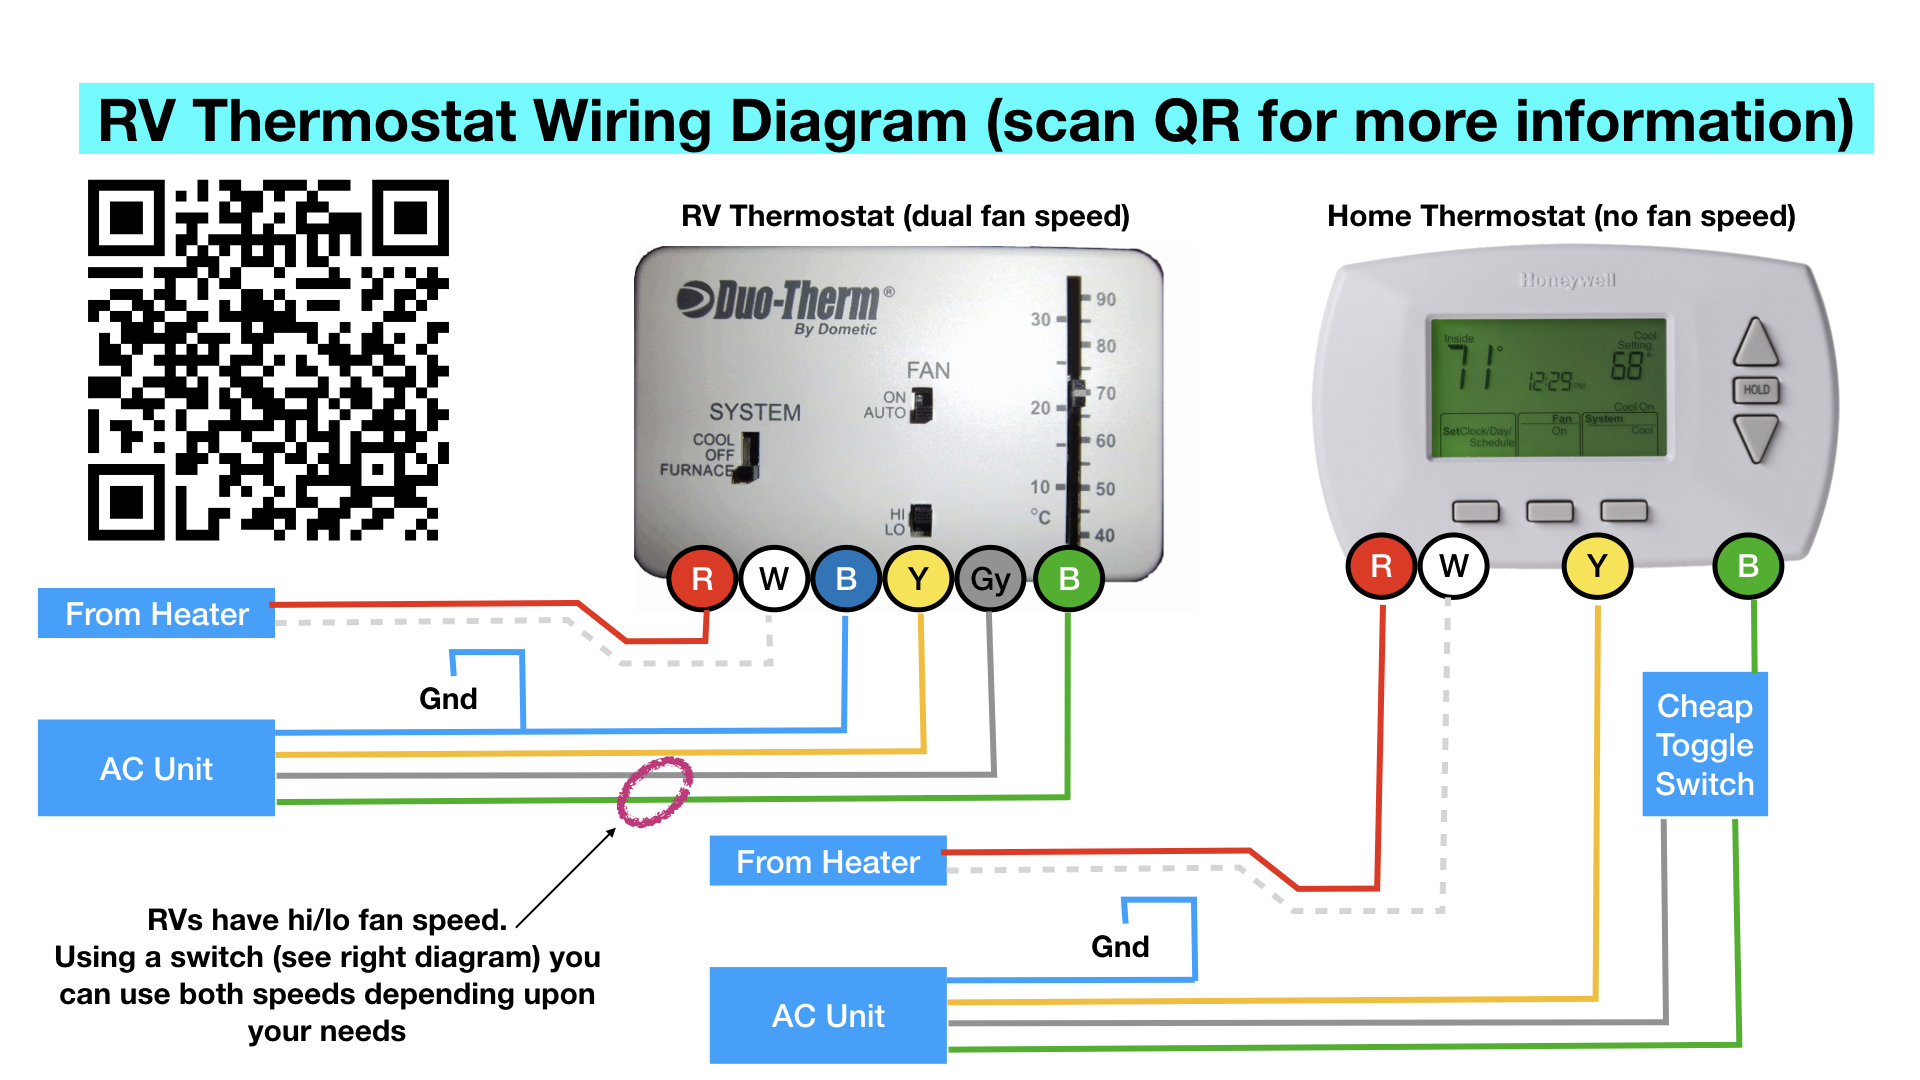 Analog Thermostat Wiring Diagram from rv52.com